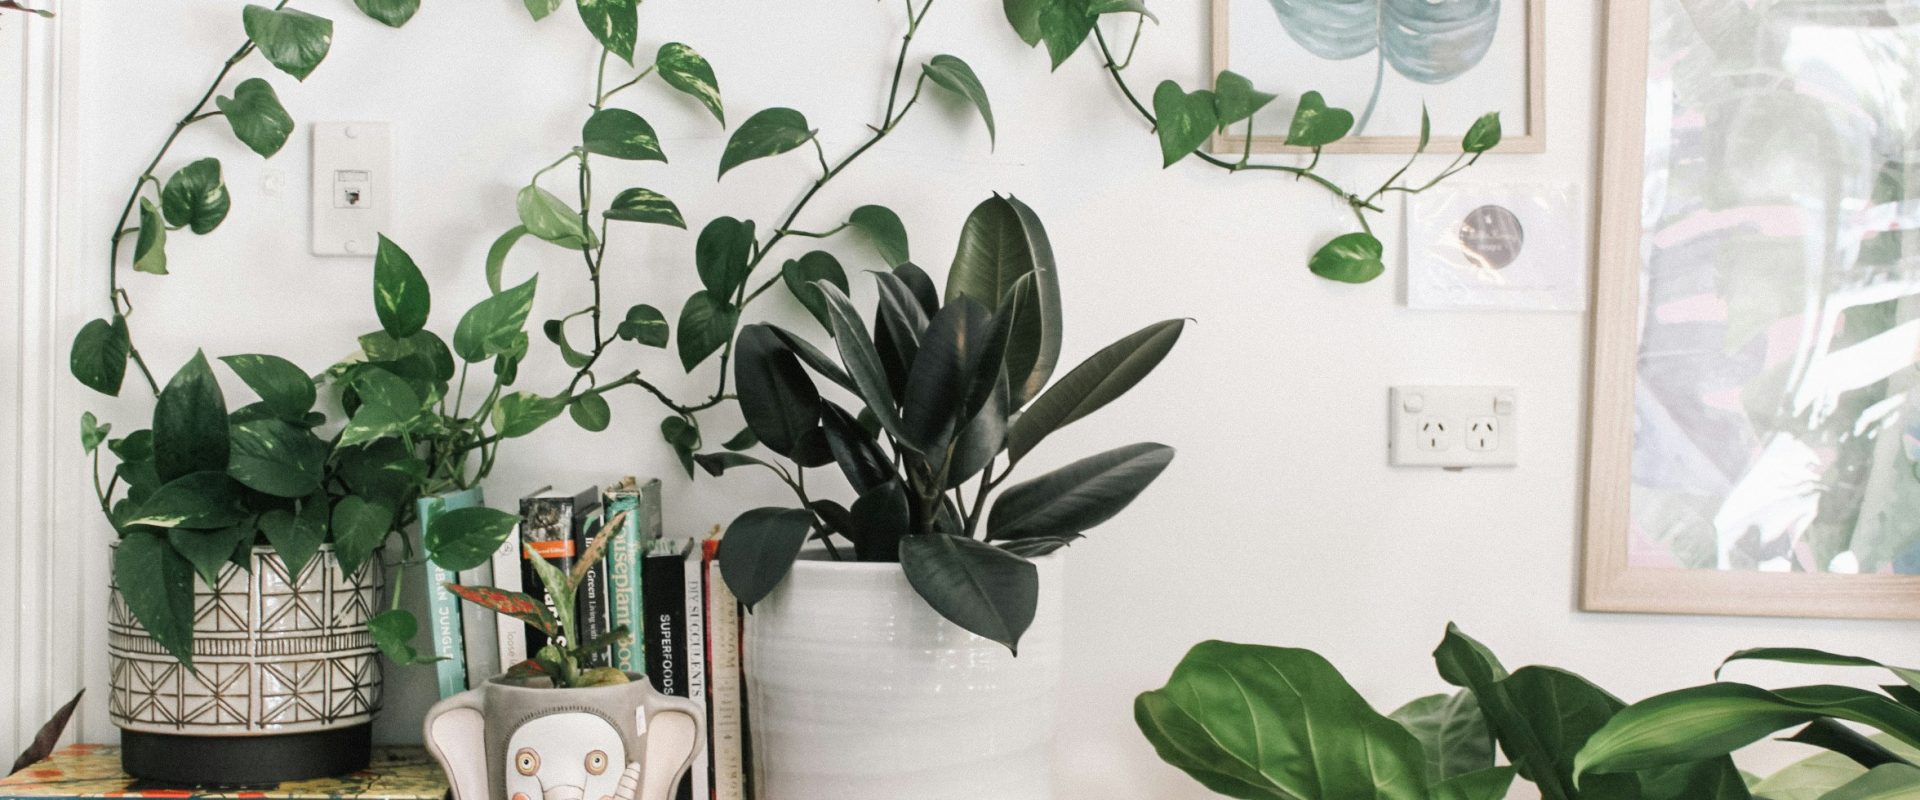 4 Lowlight plants for your home or office